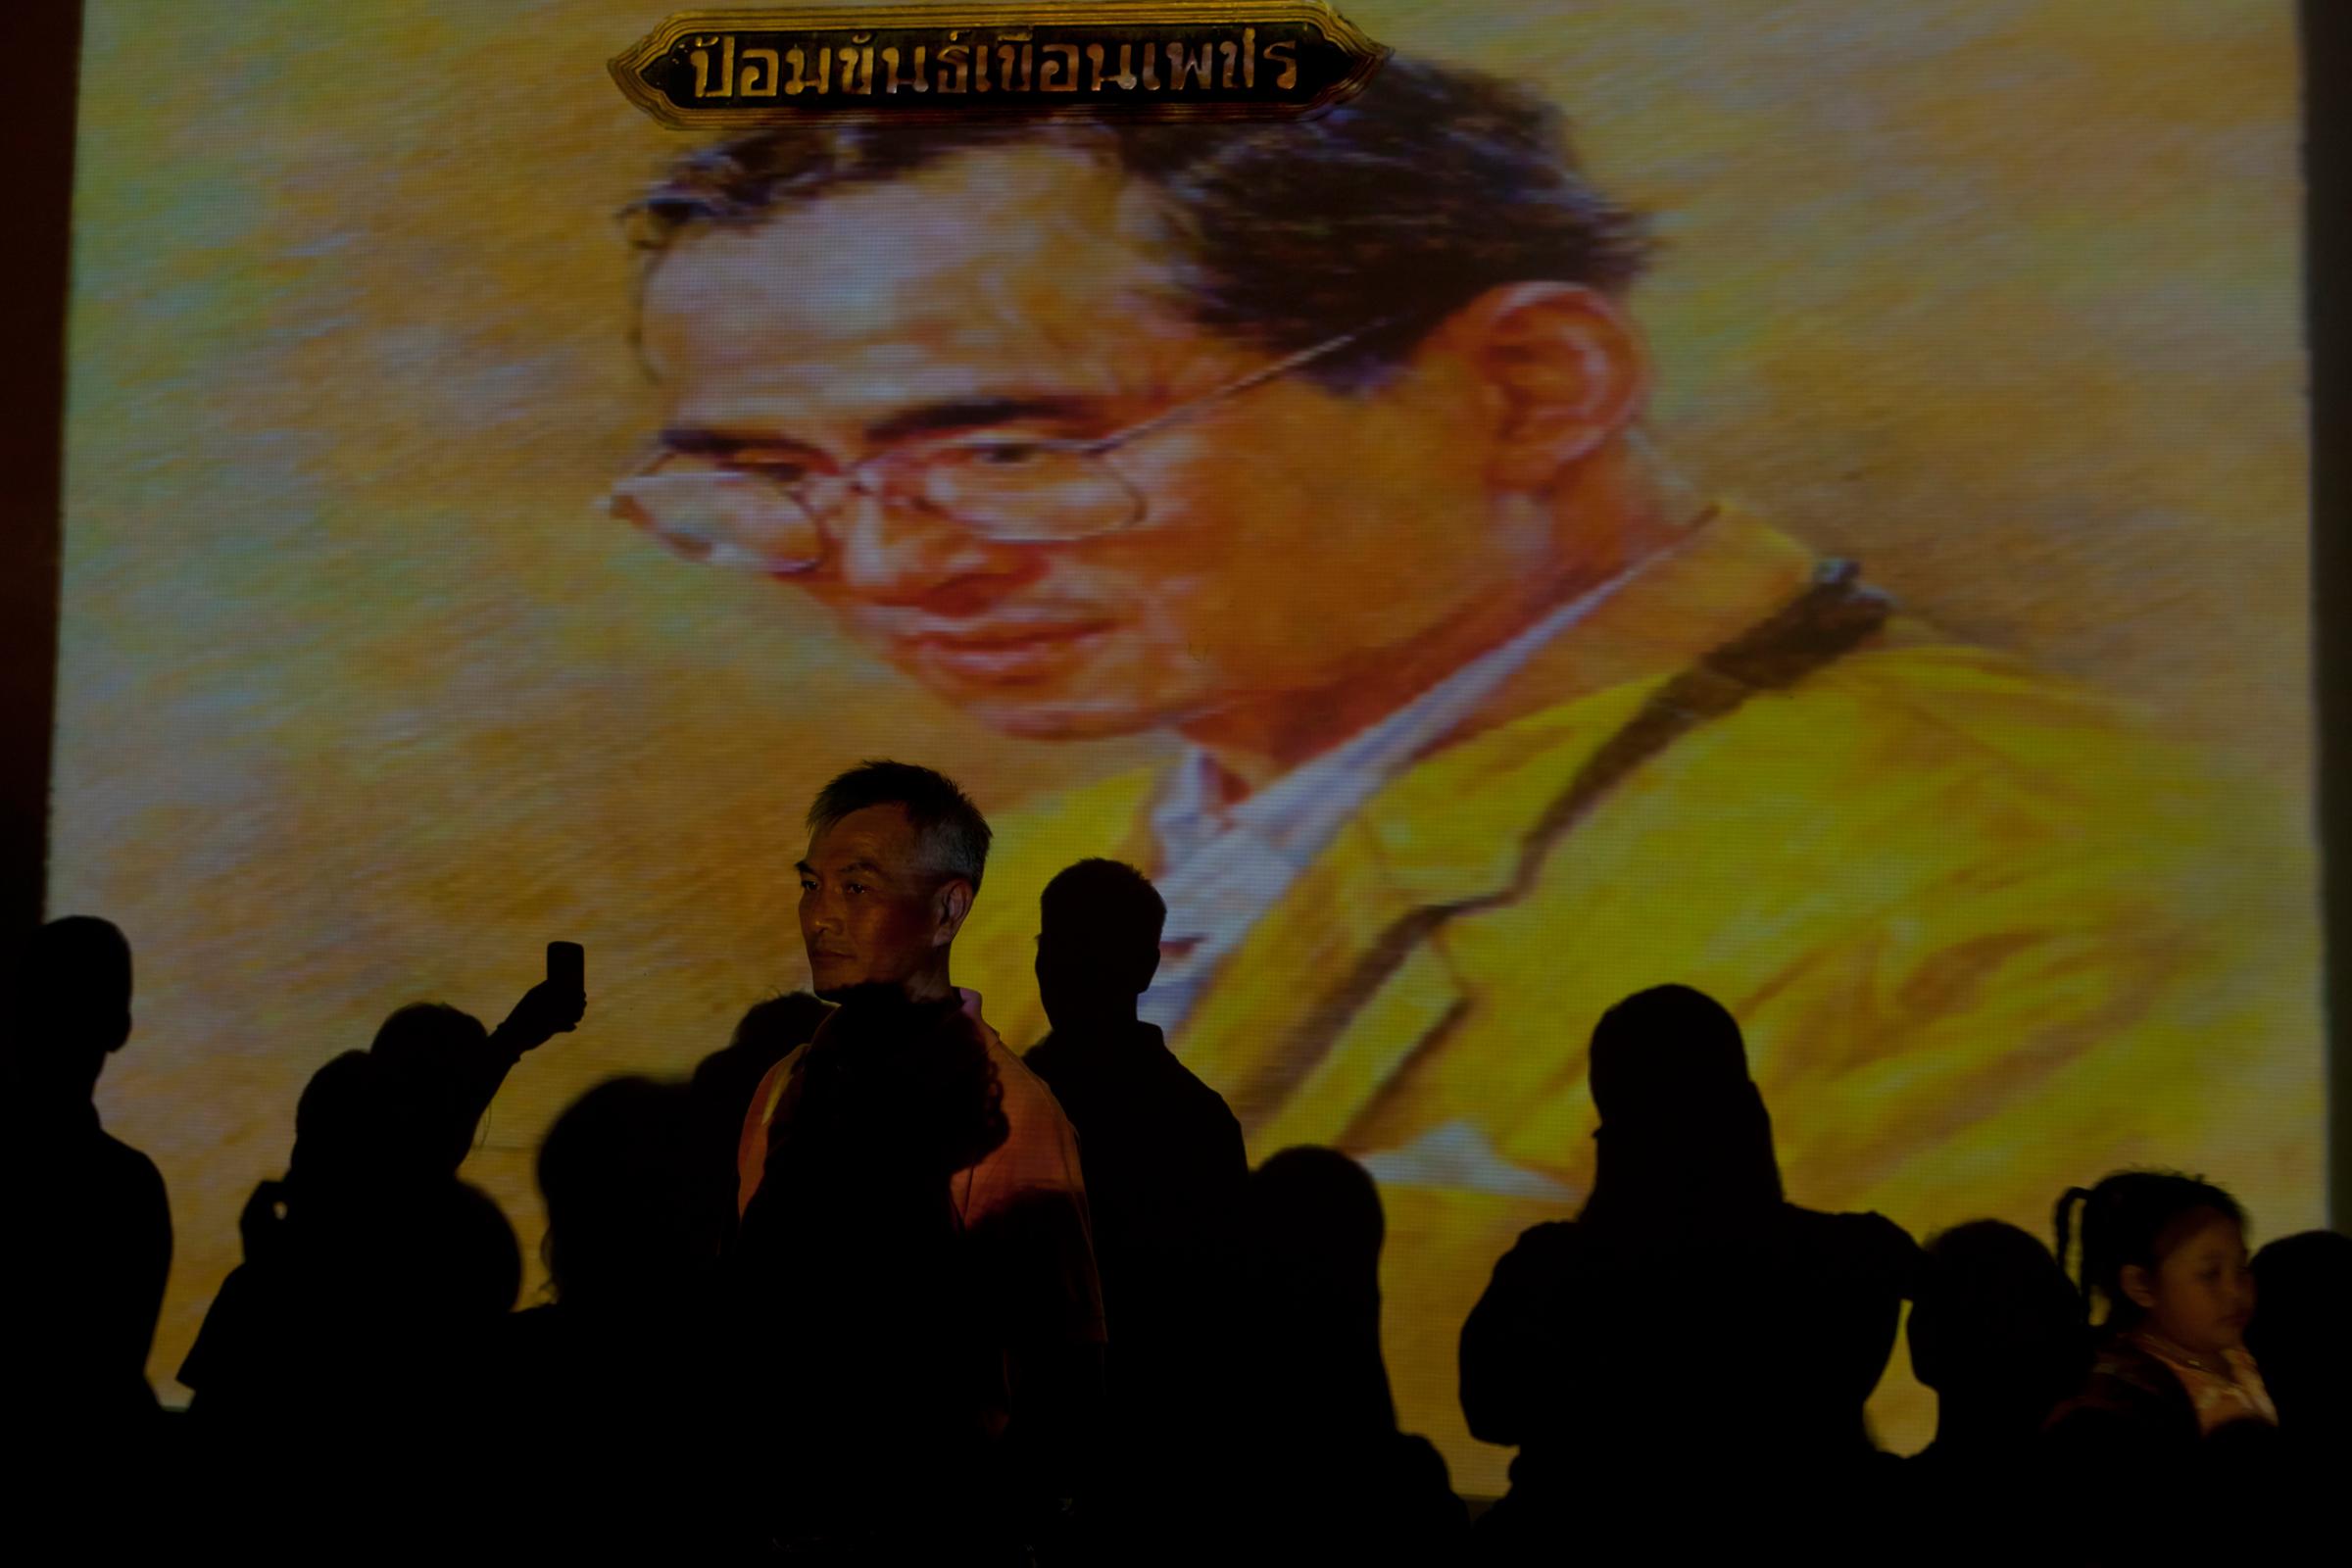 People in front of an image of King Bhumibol Adulyadej of Thailand during a celebration of his 84th birthday, Bangkok, Thailand, Dec. 5, 2011.